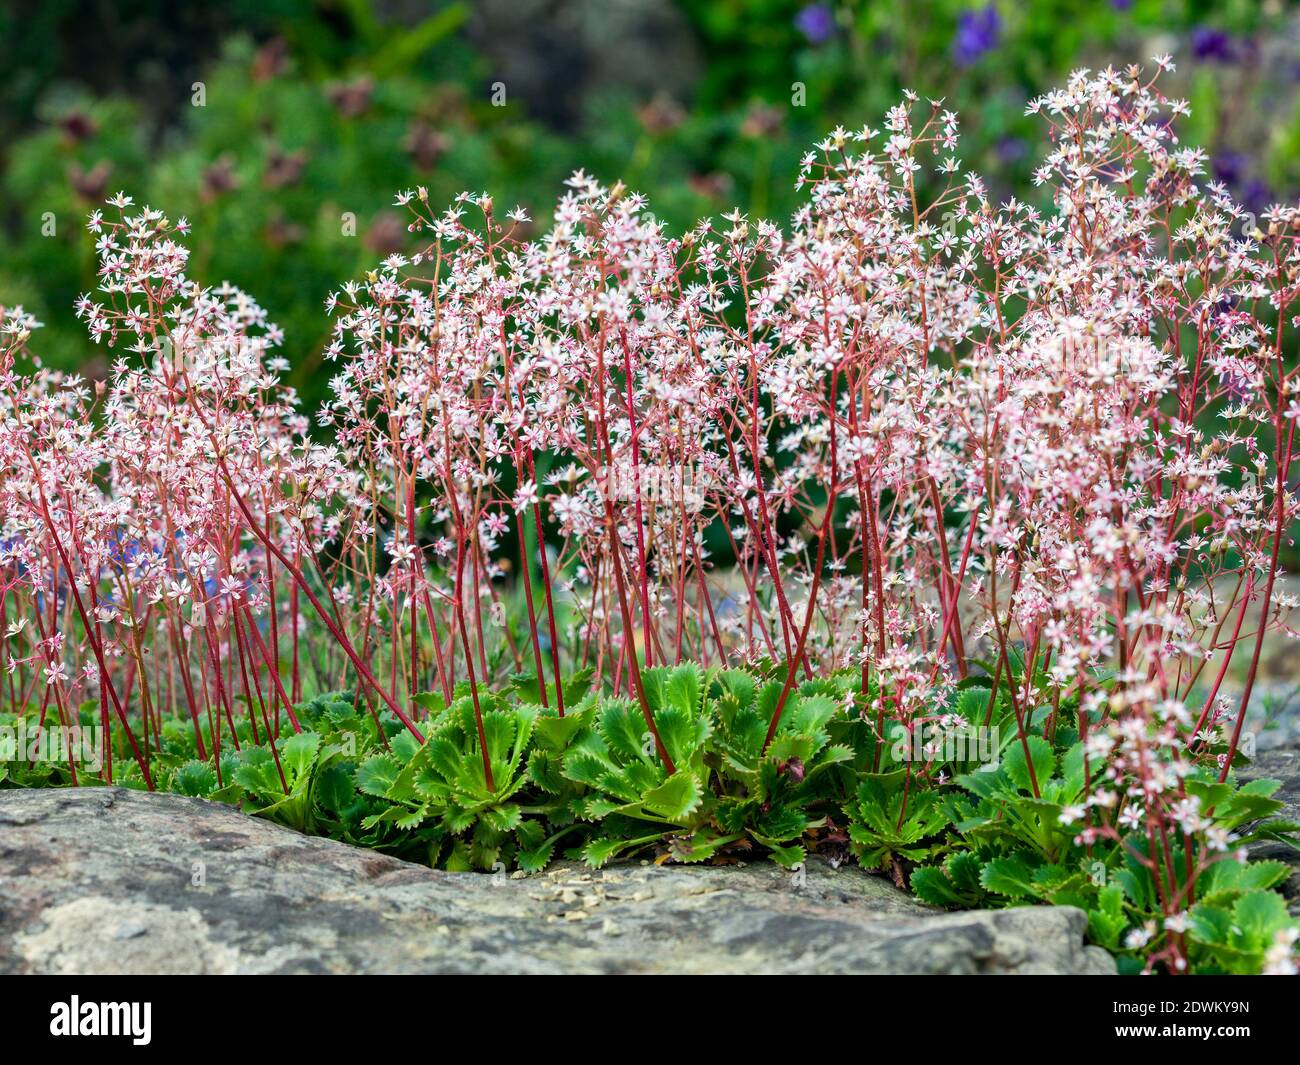 Saxifraga spathularis a spring summer flowering plant with a pink summertime flower commonly known saxifrage St Patrick's Cabbage which is a wildflowe Stock Photo